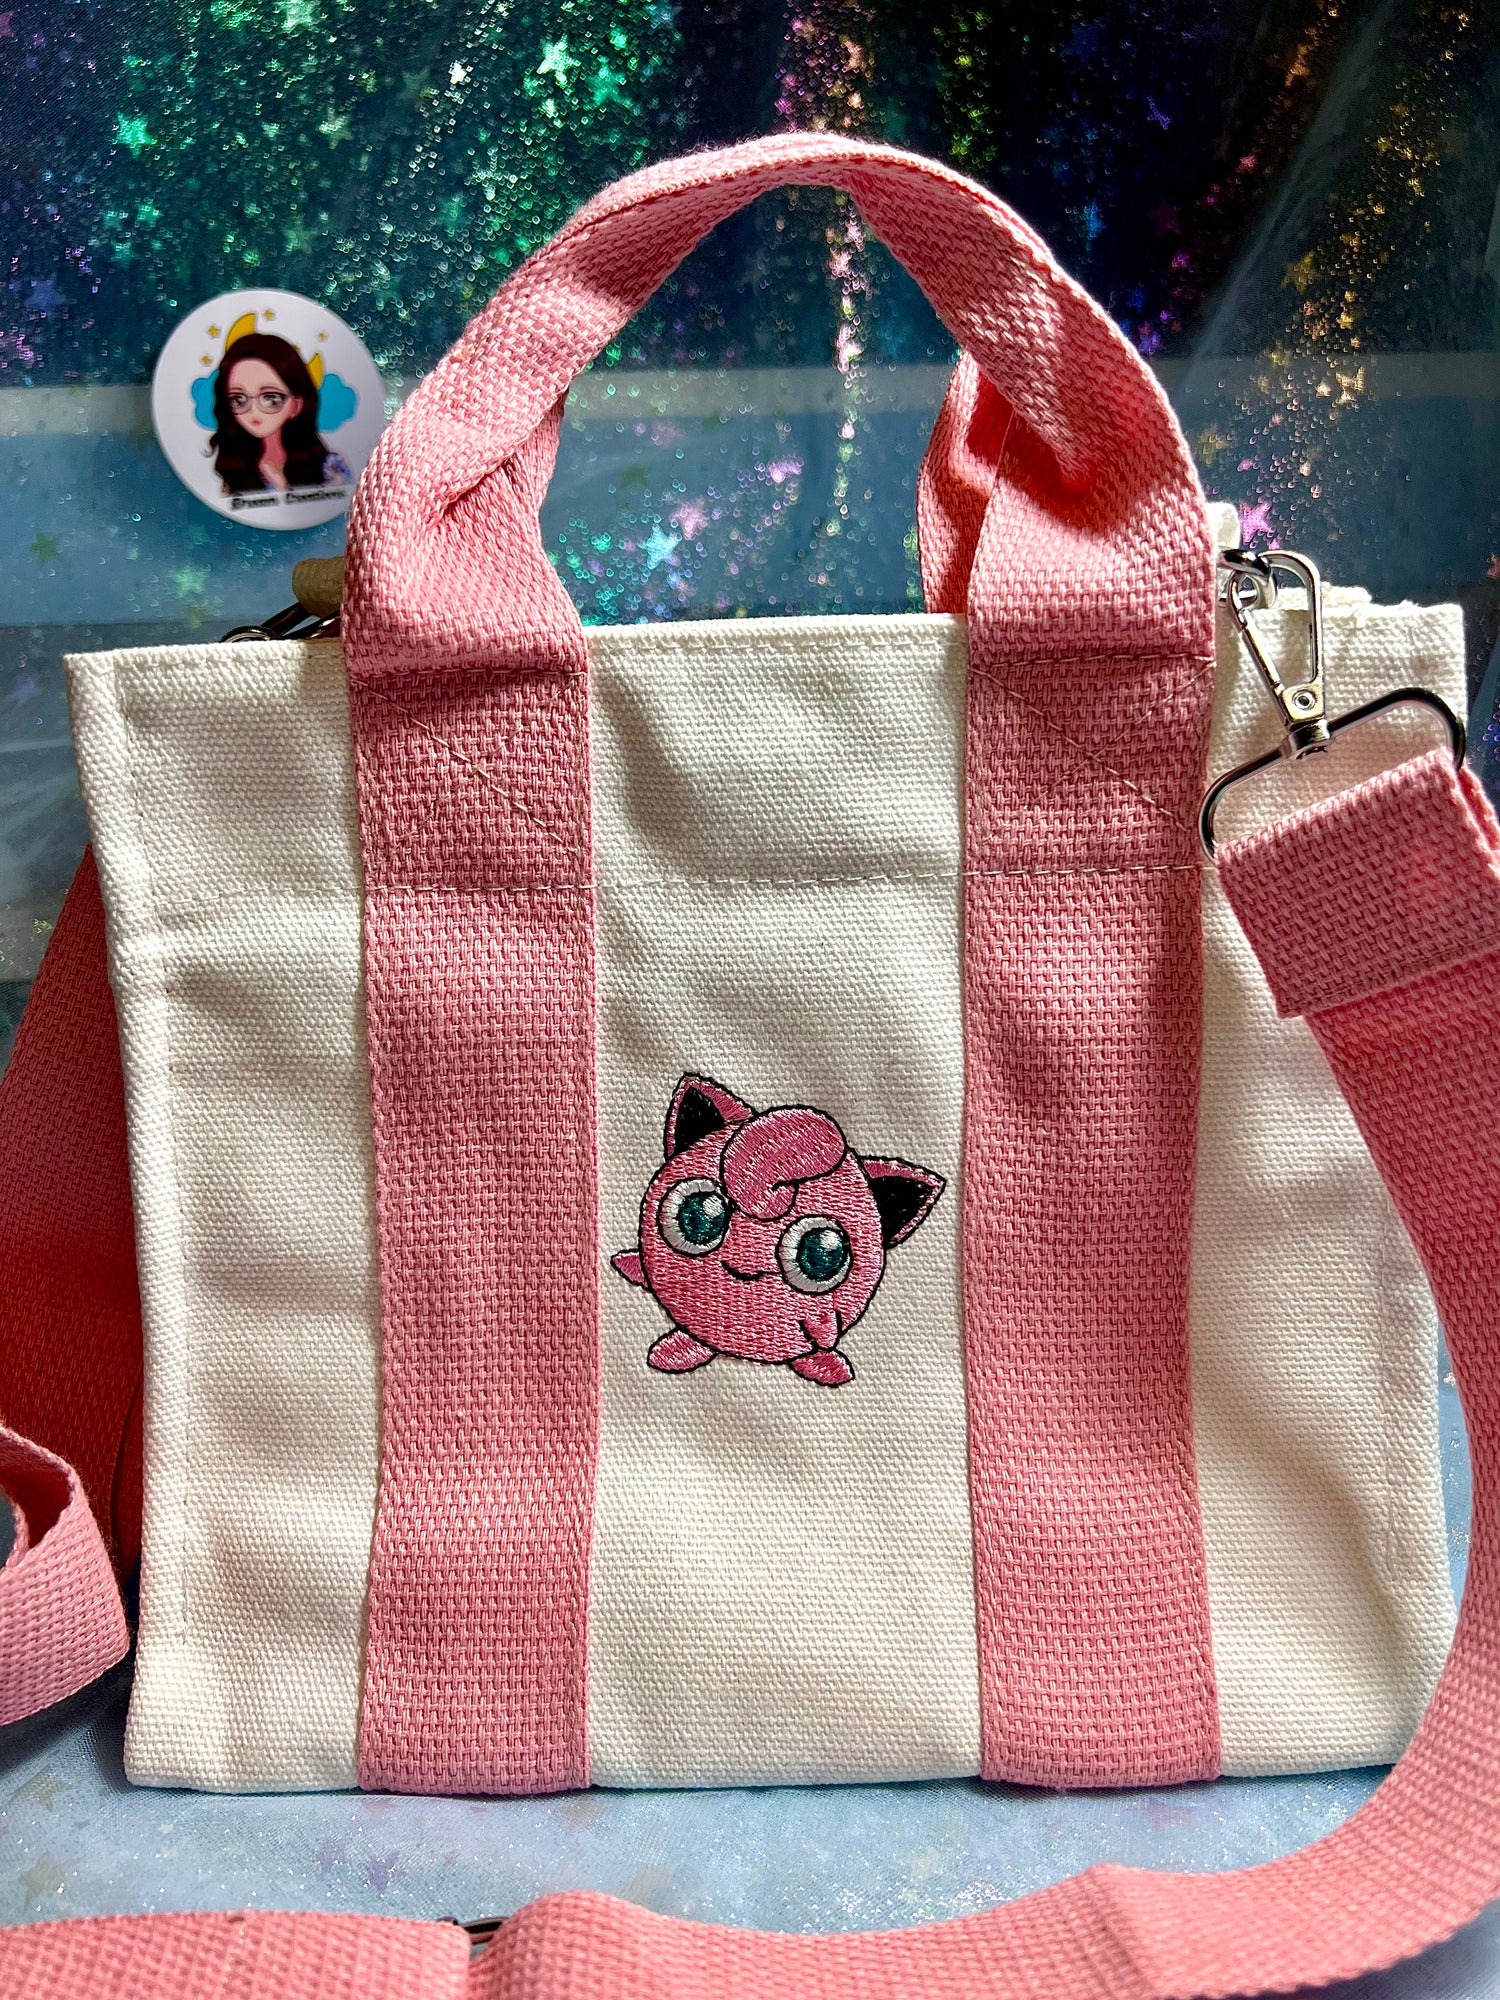 Embroidery Jigglypuff Tote Bag